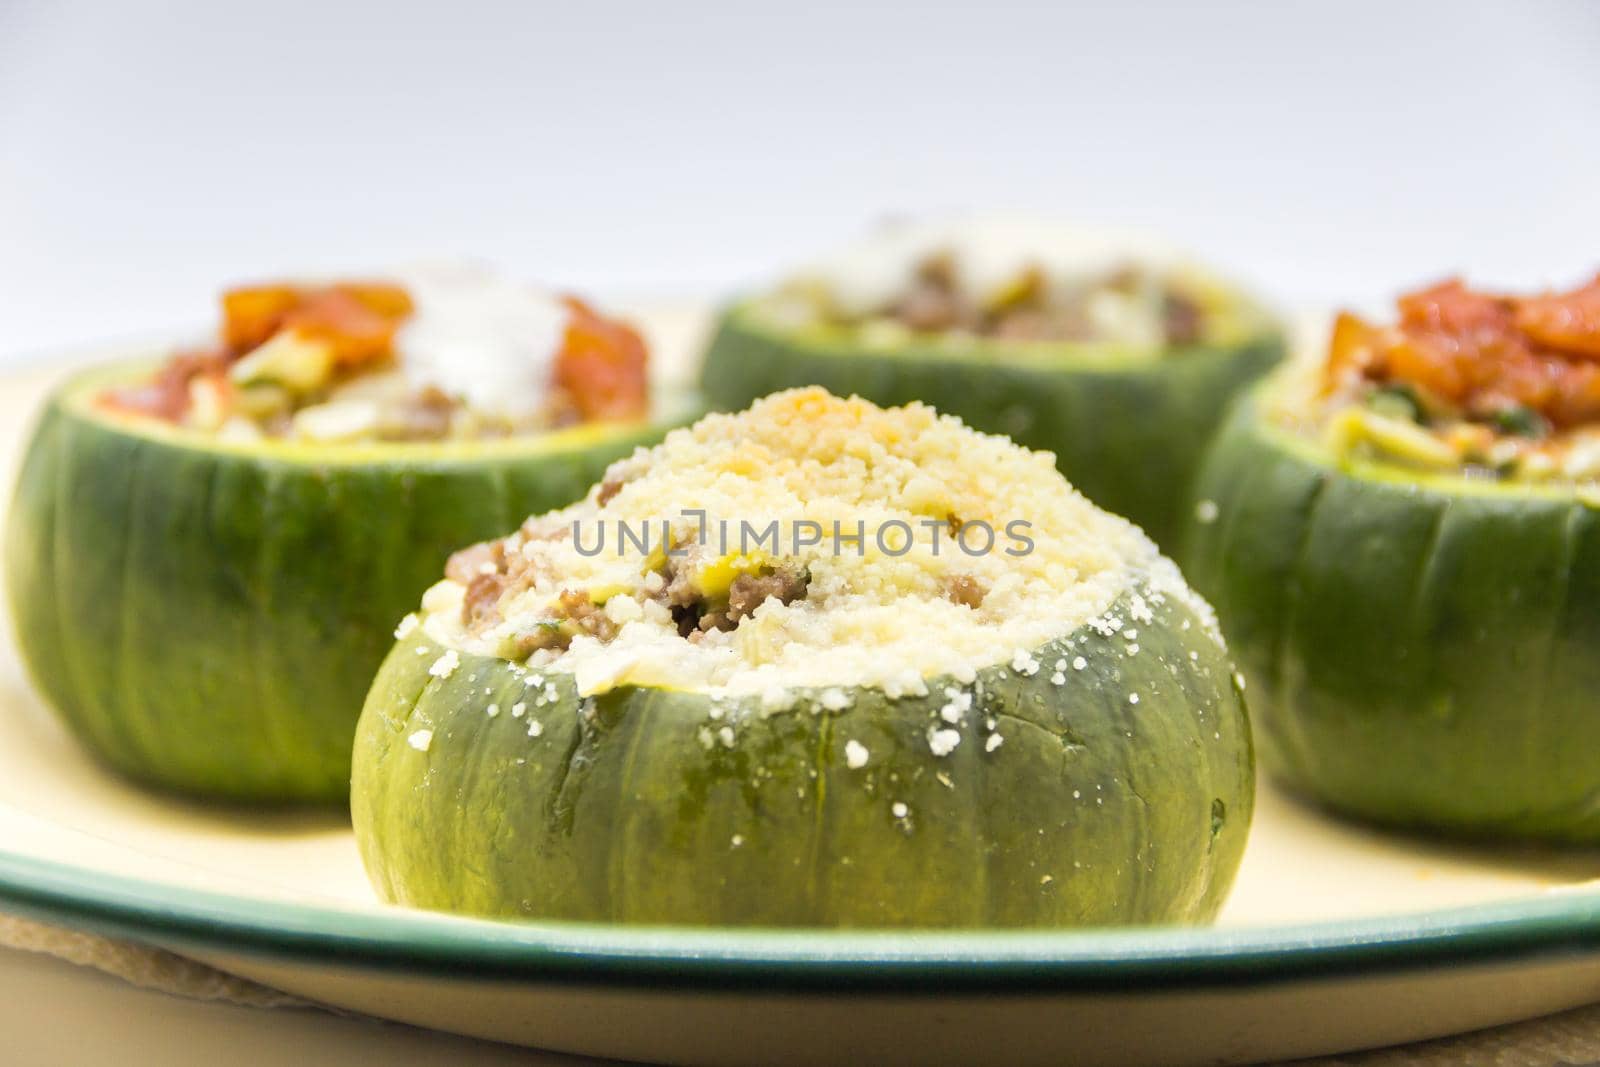 zucchini stuffed with meat and a variety of sauces by GabrielaBertolini